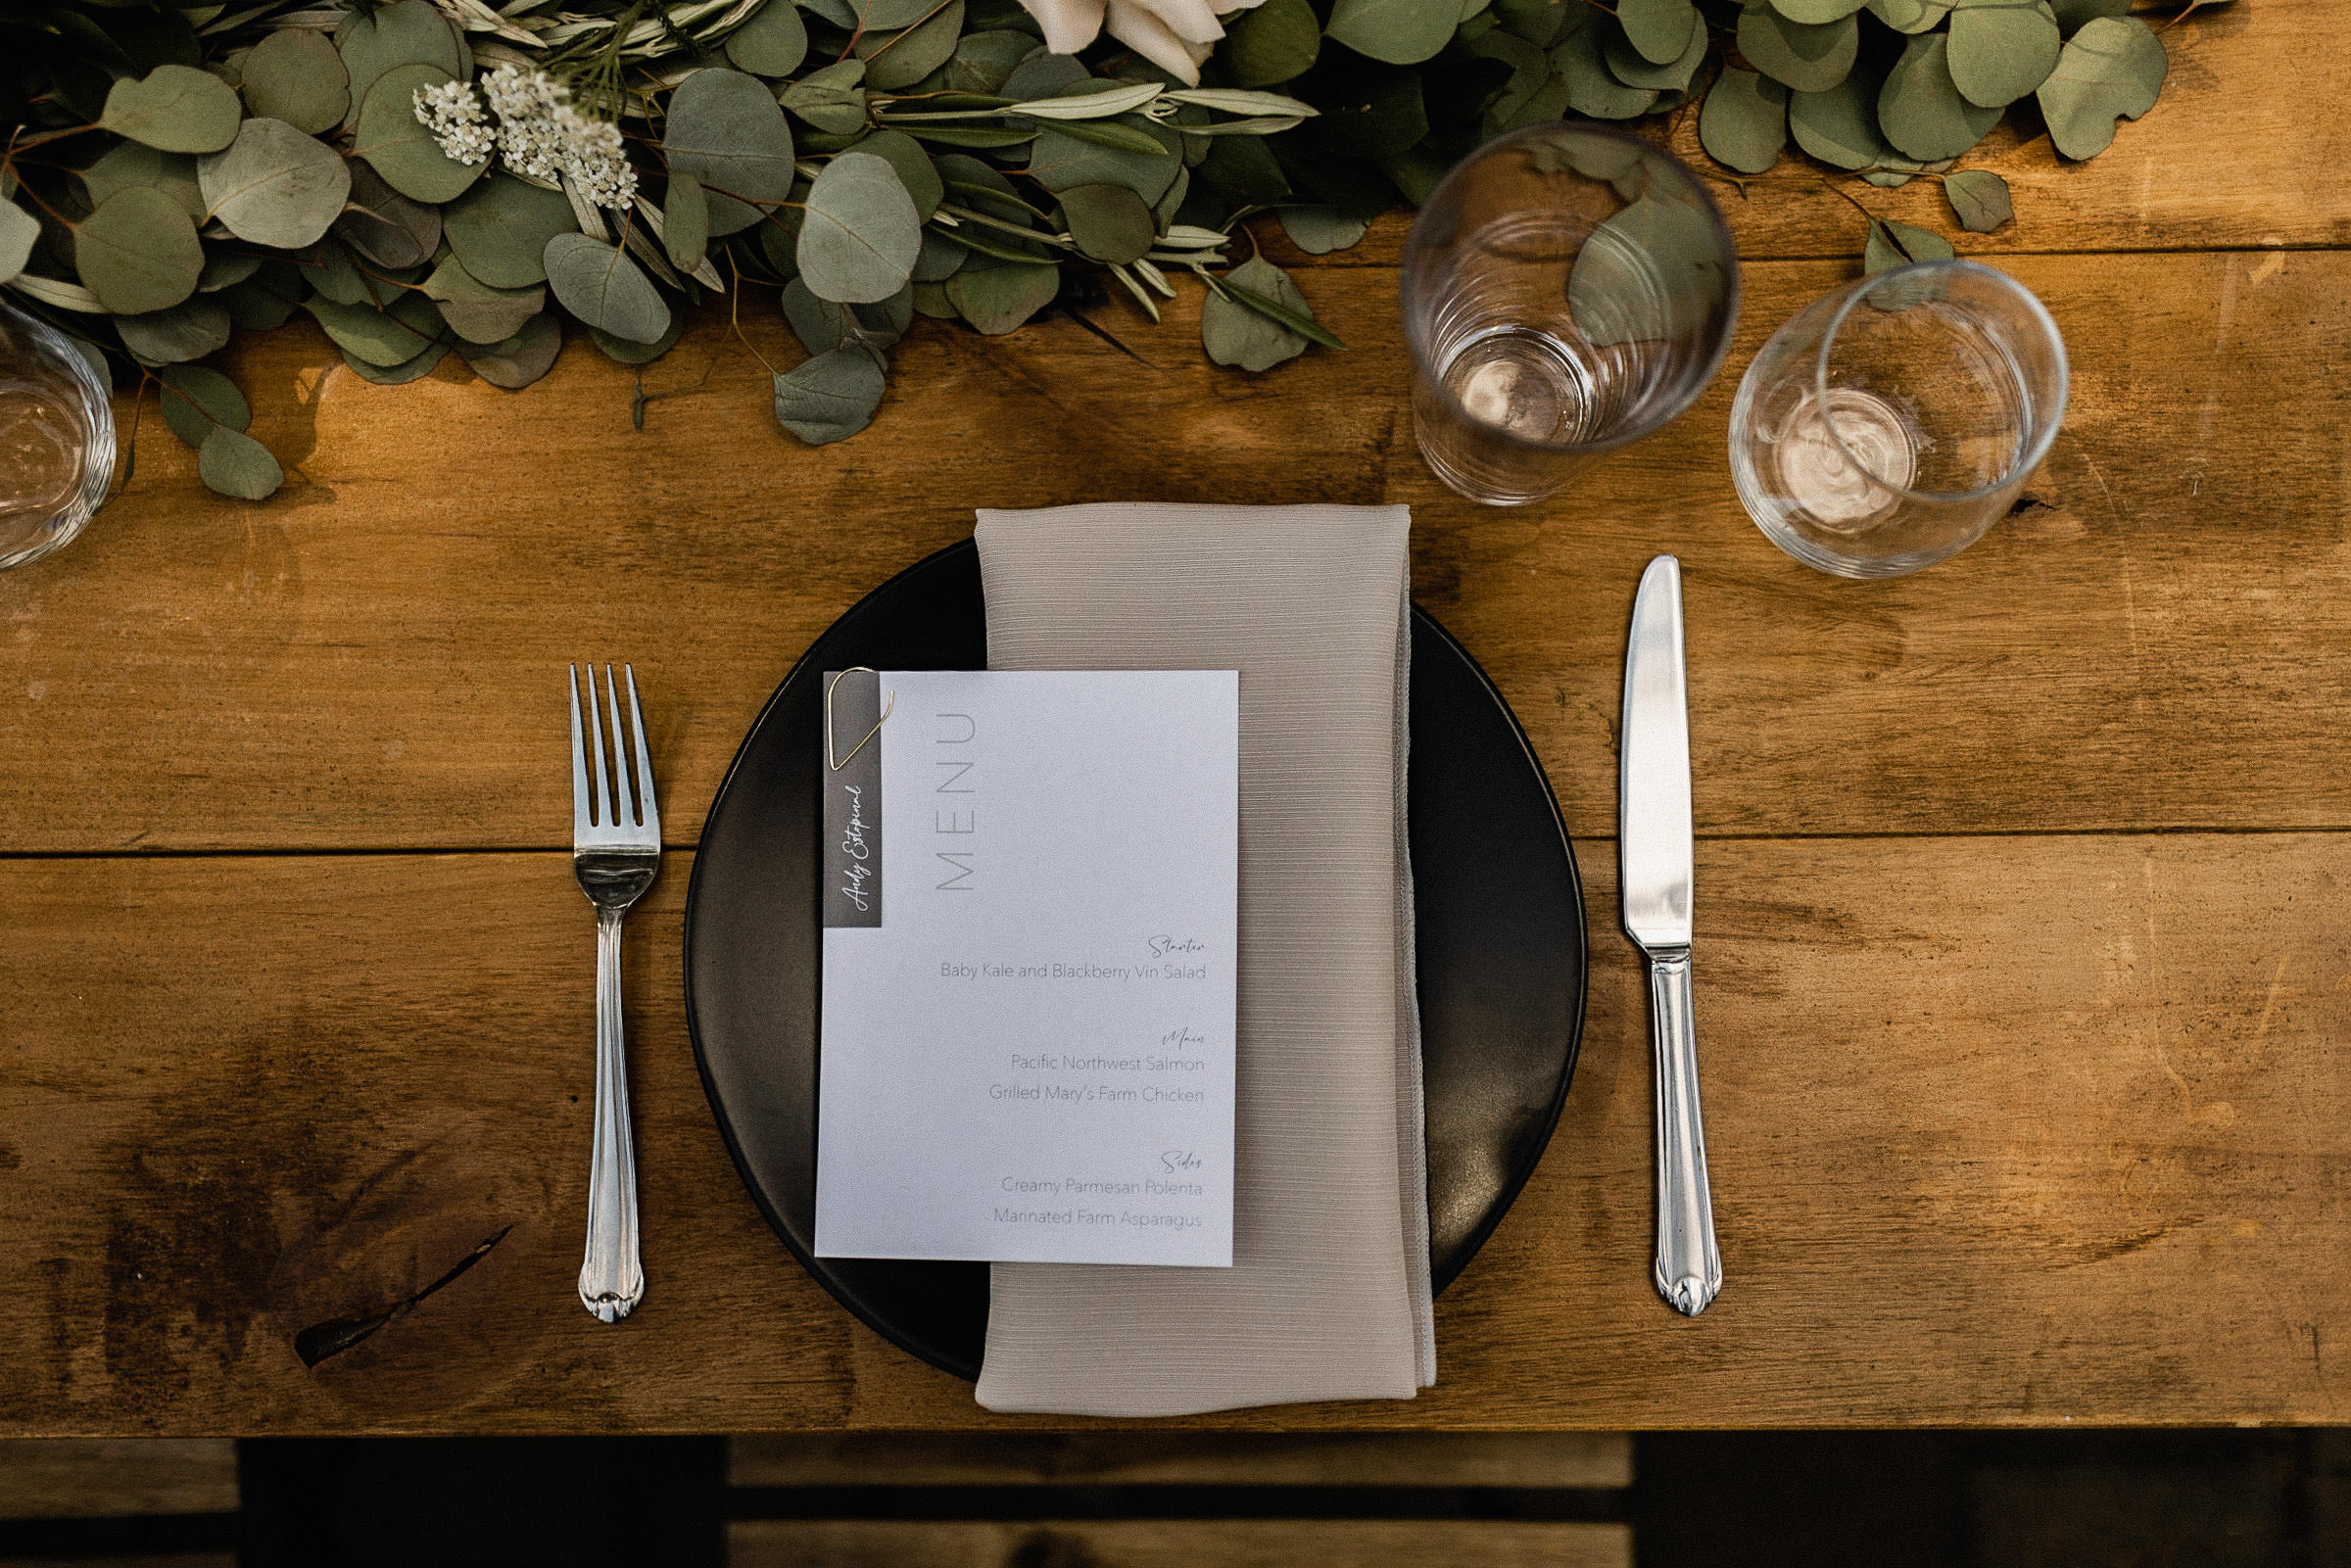 A bird's-eye view of a table setting featuring the dinner menu